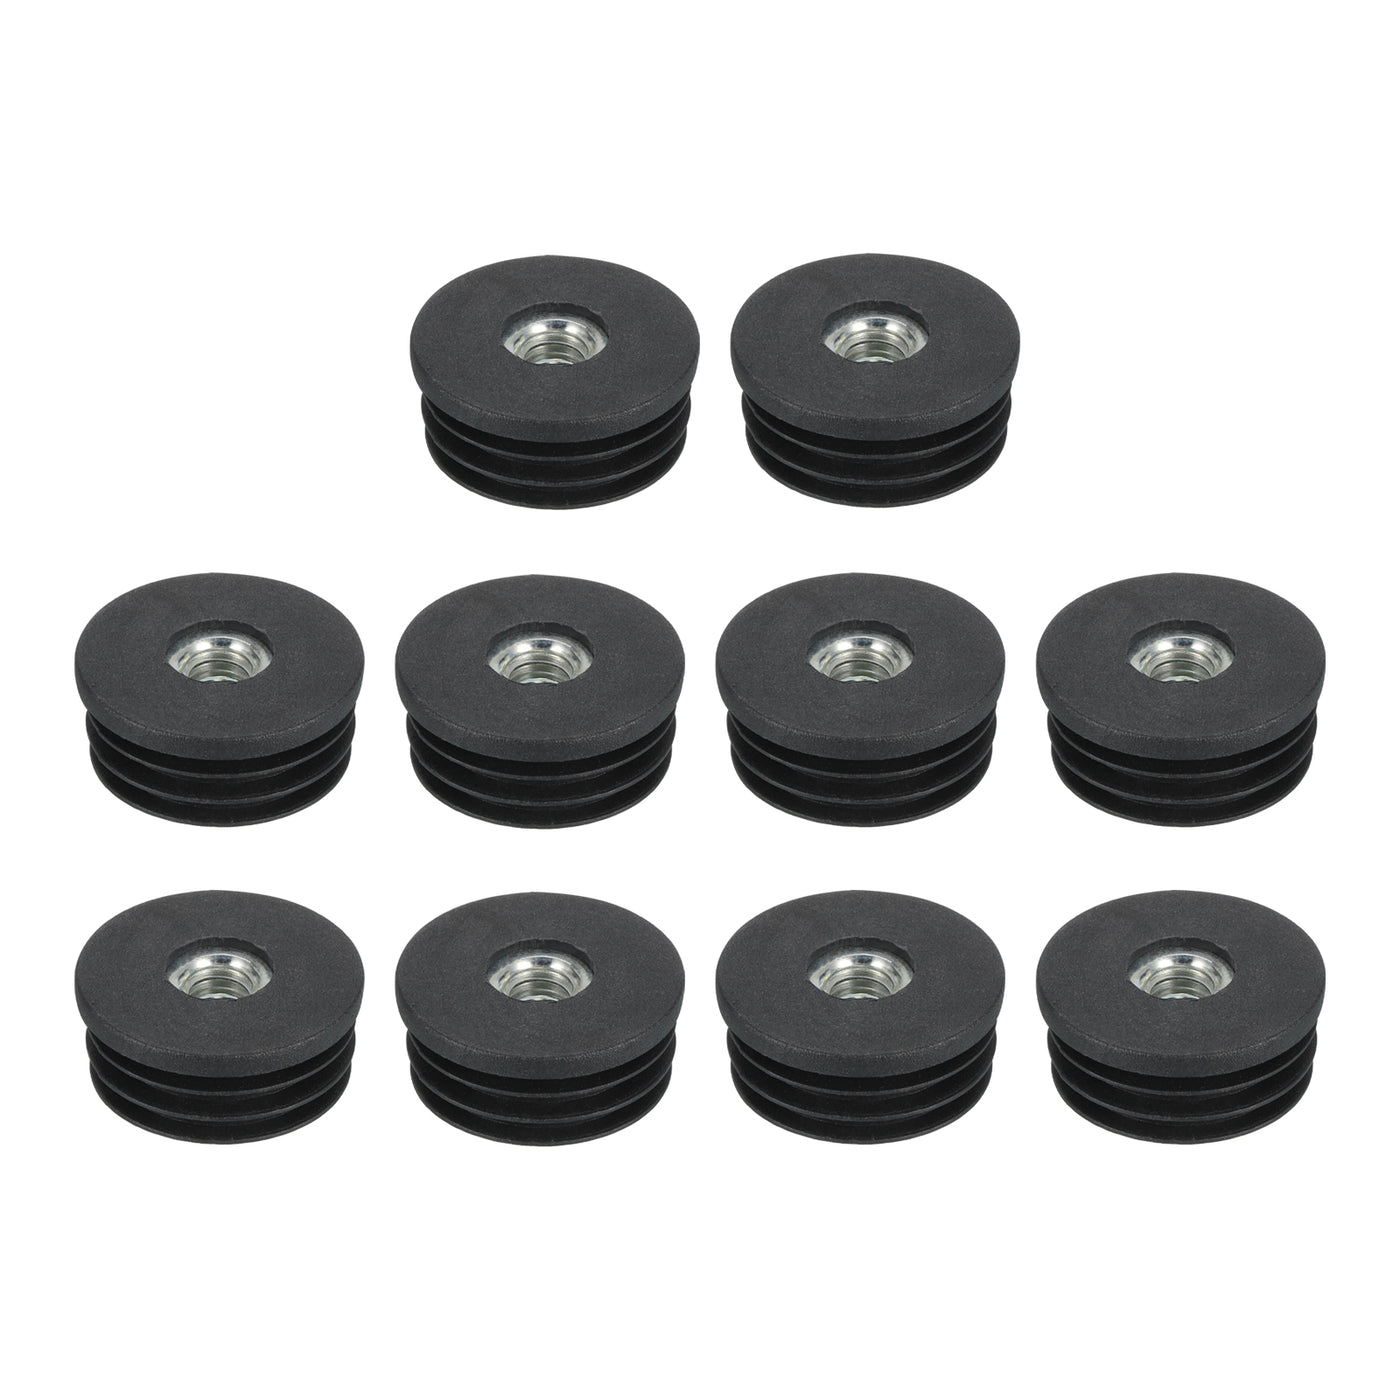 uxcell Uxcell 10Pcs Caster Insert with Thread, 32mm/1.26" M8 Thread for Furniture